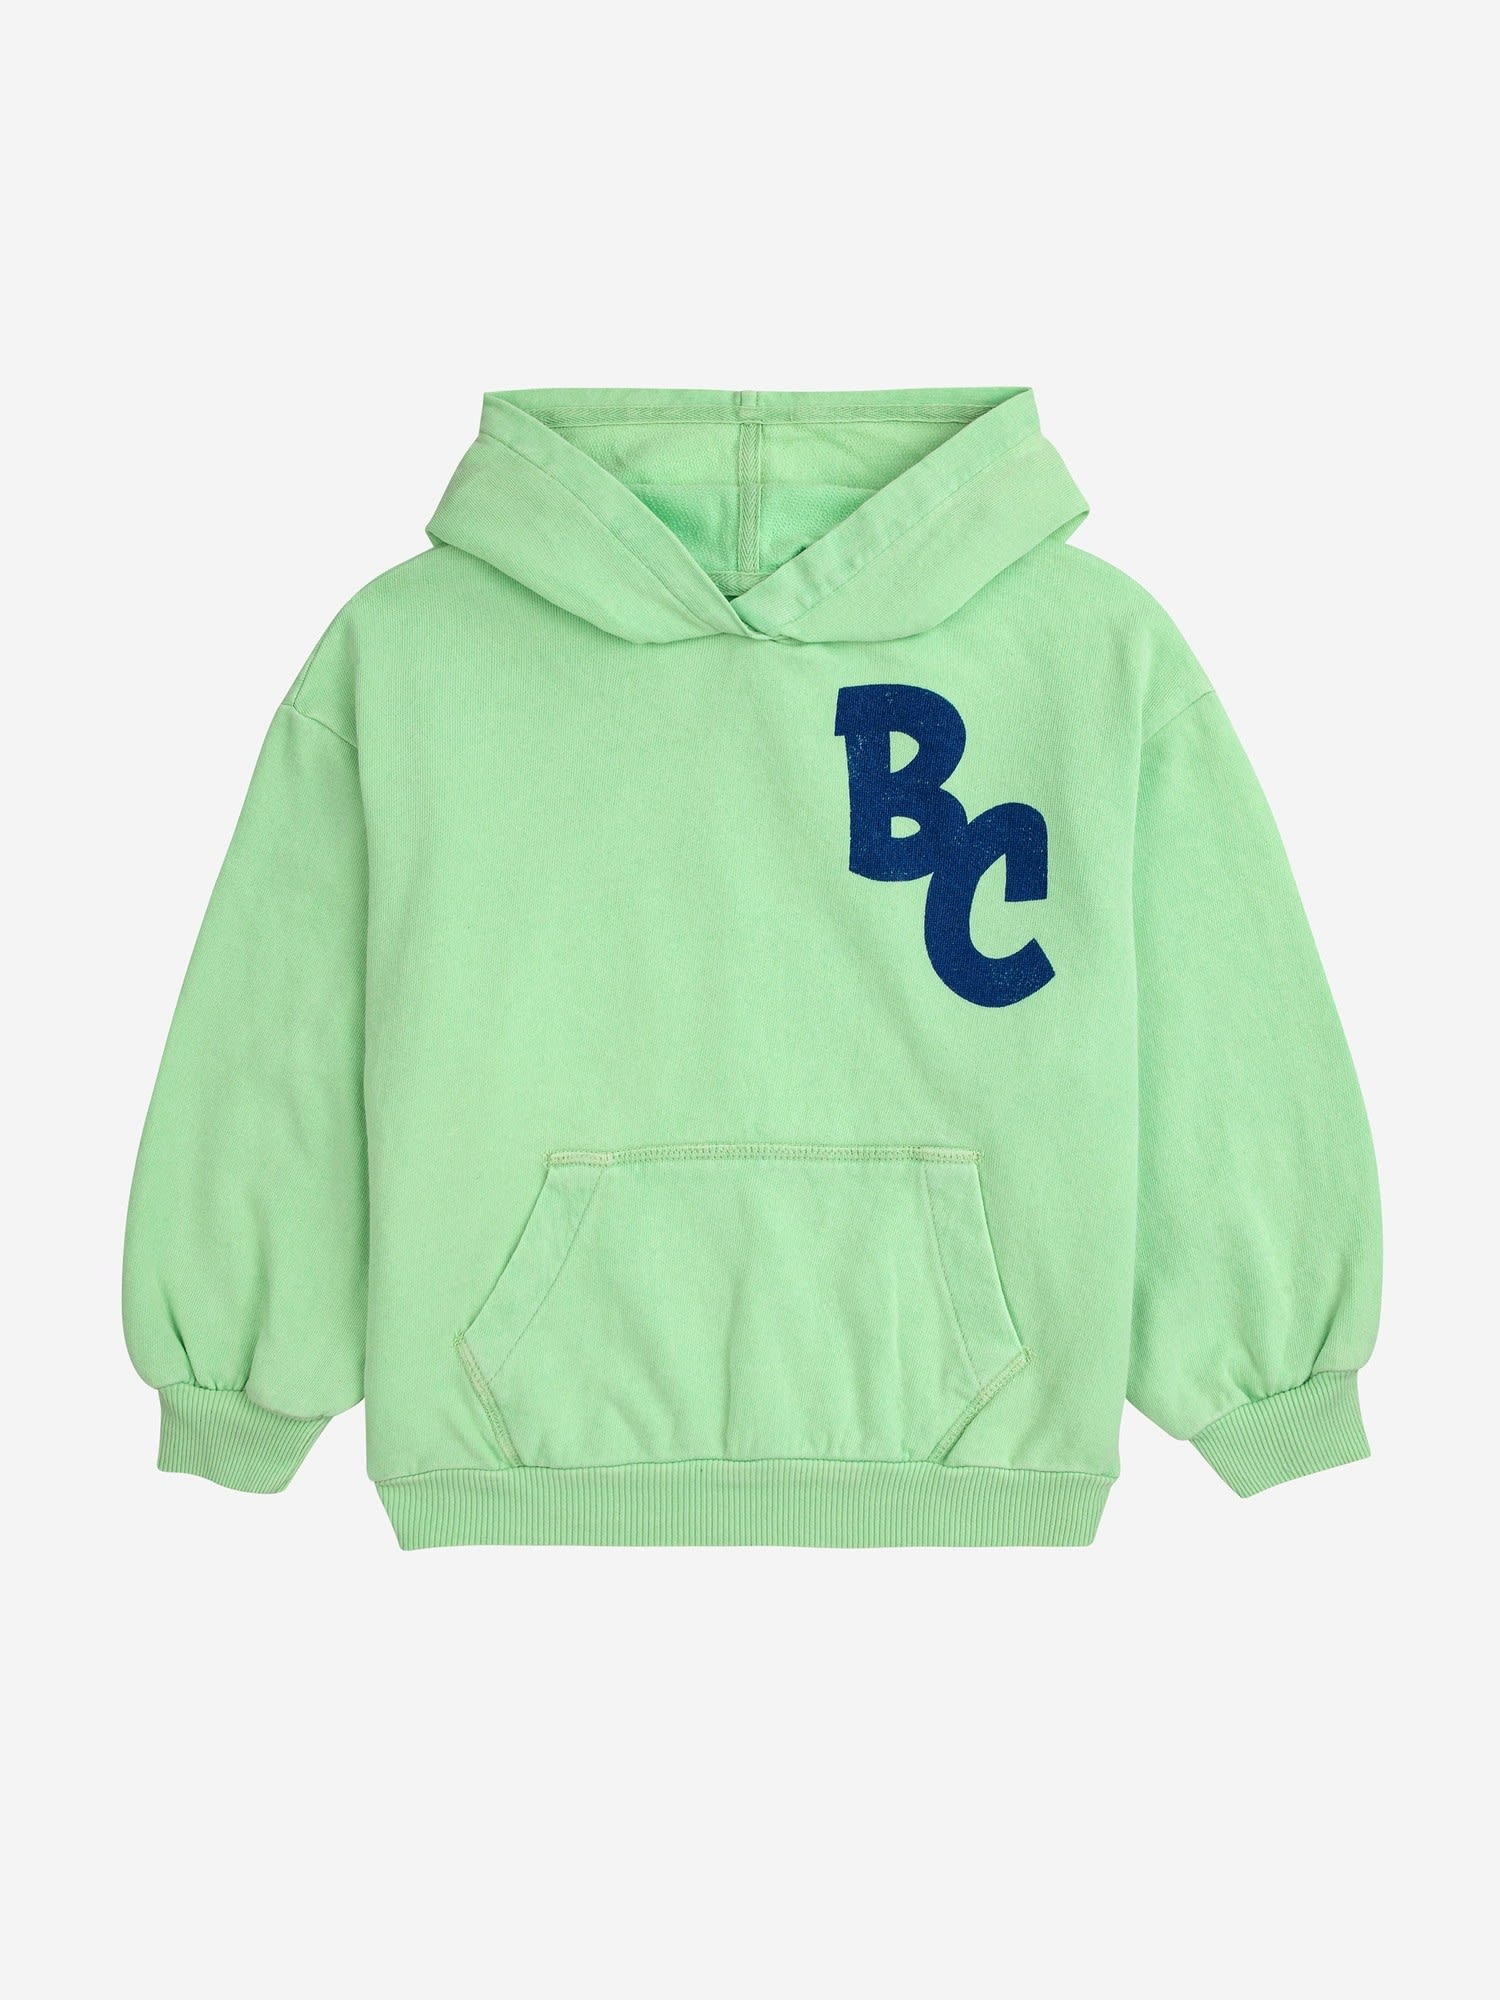 Bobo Choses Green Sweatshirt For Kids With Multicolor Logo